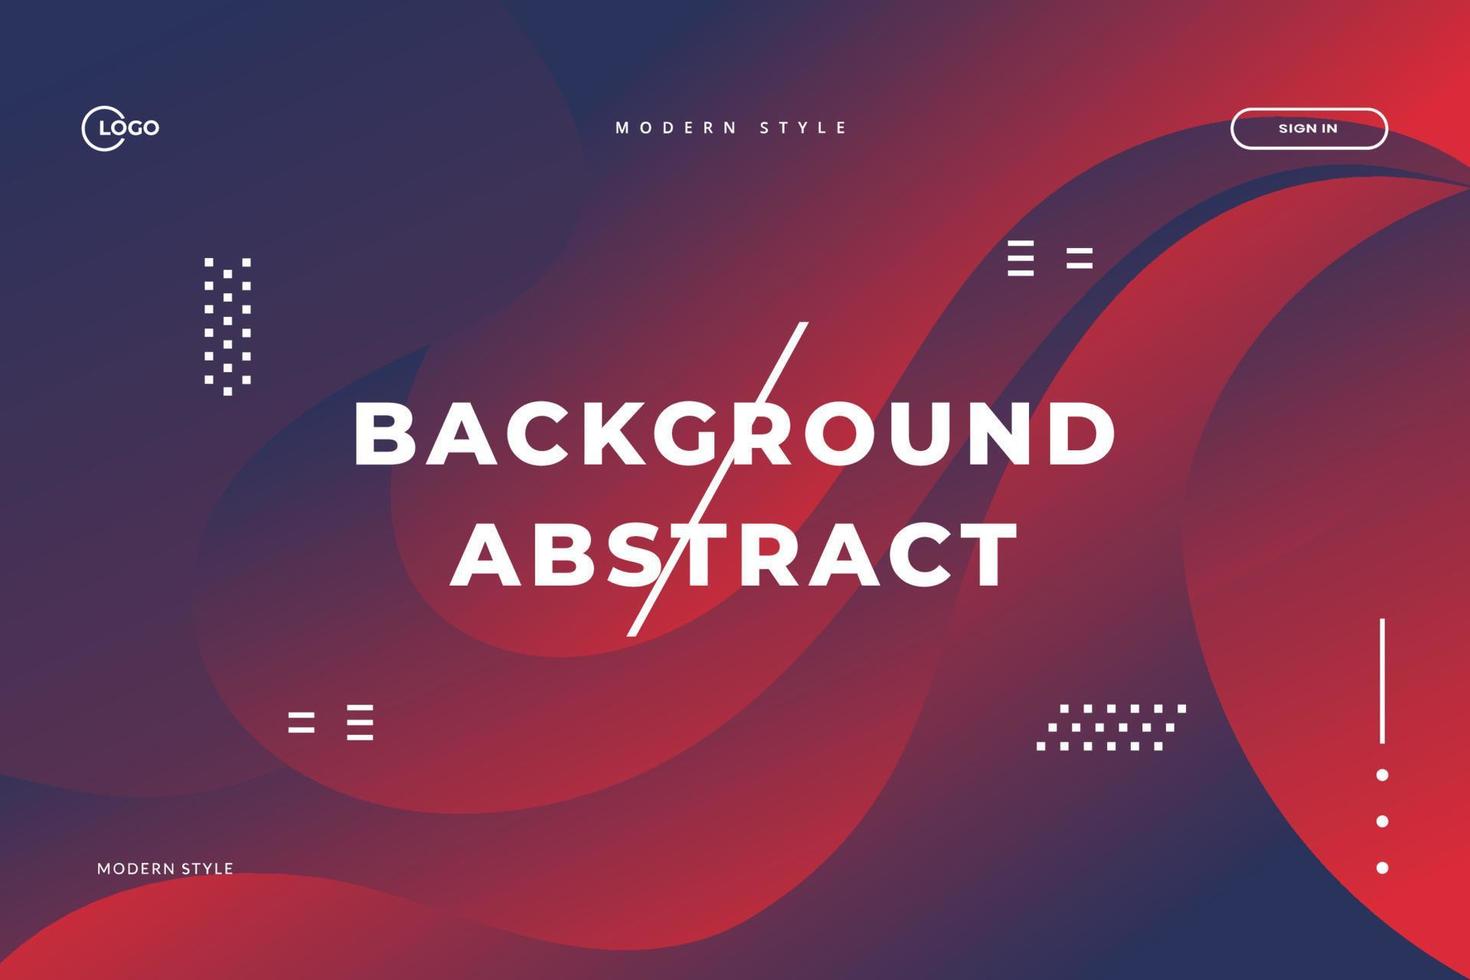 Dark Red dynamic 3D background with modern fluid shape concept and minimalist poster suitable for various design media, including banner, web, header, cover, billboard, flyer, and social media vector